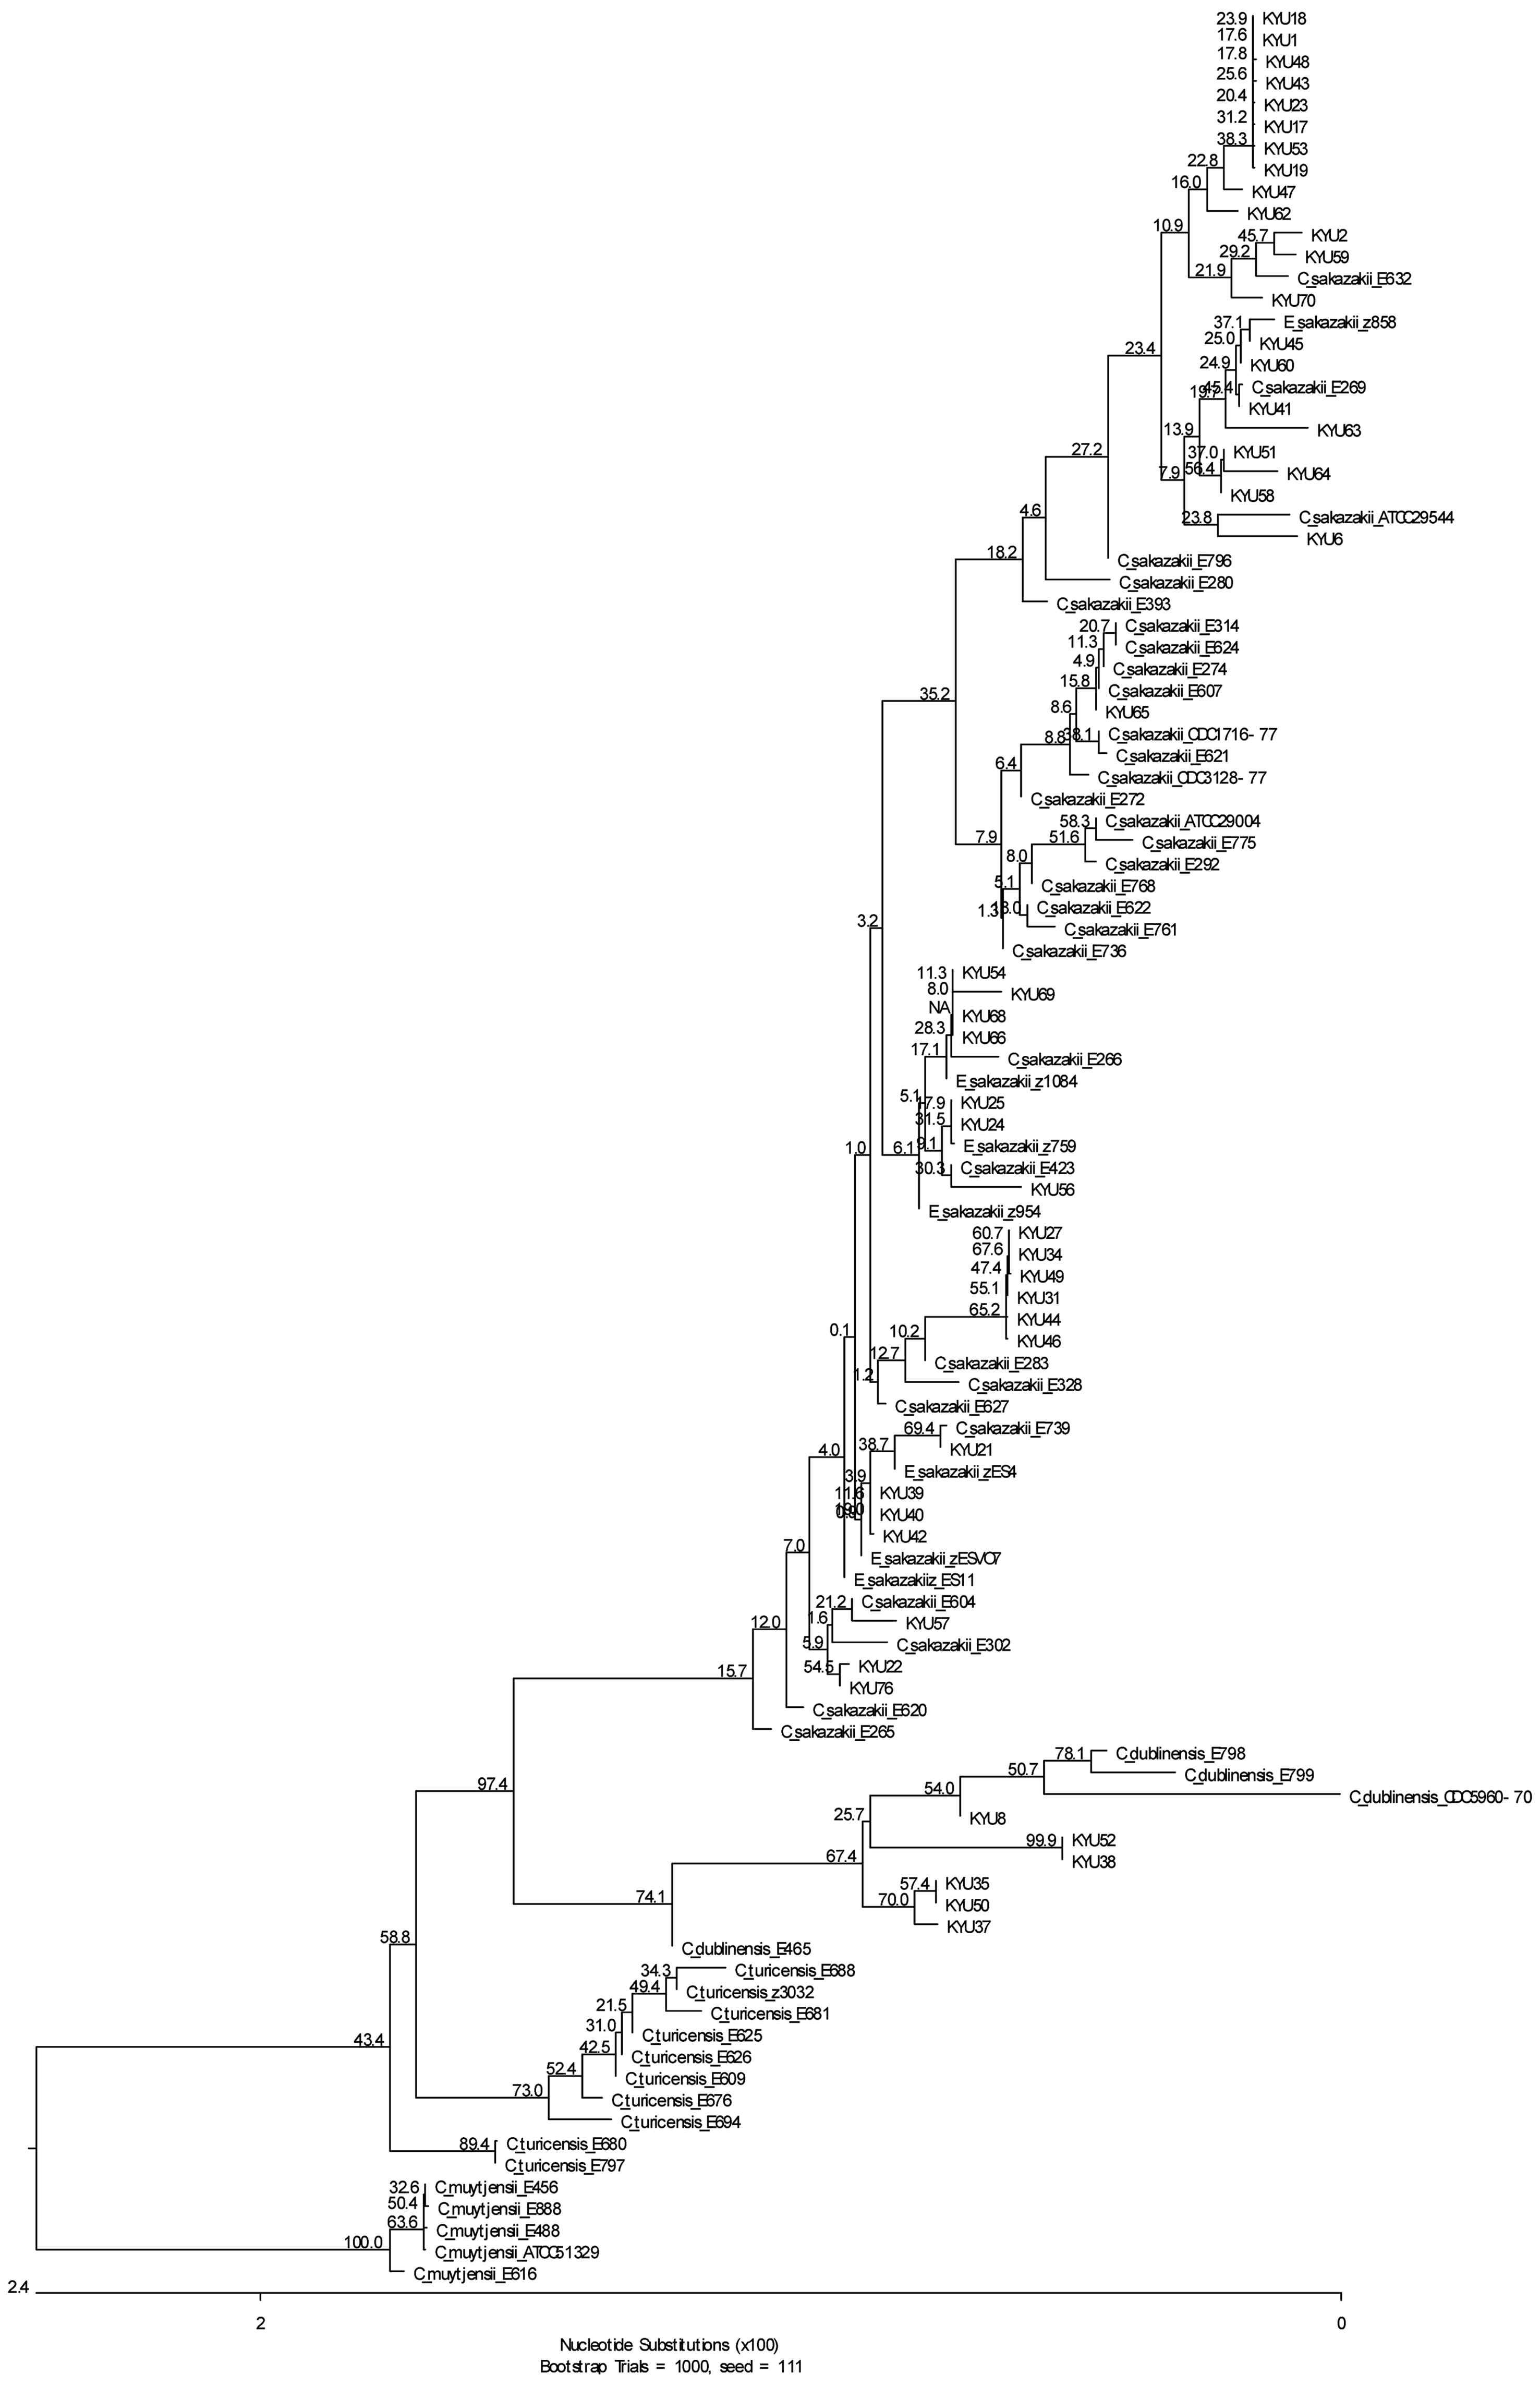 Neighbor-joining tree of Cronobacter spp. and related organisms based on partial 16SrDNA sequences(bootstraps=1000)